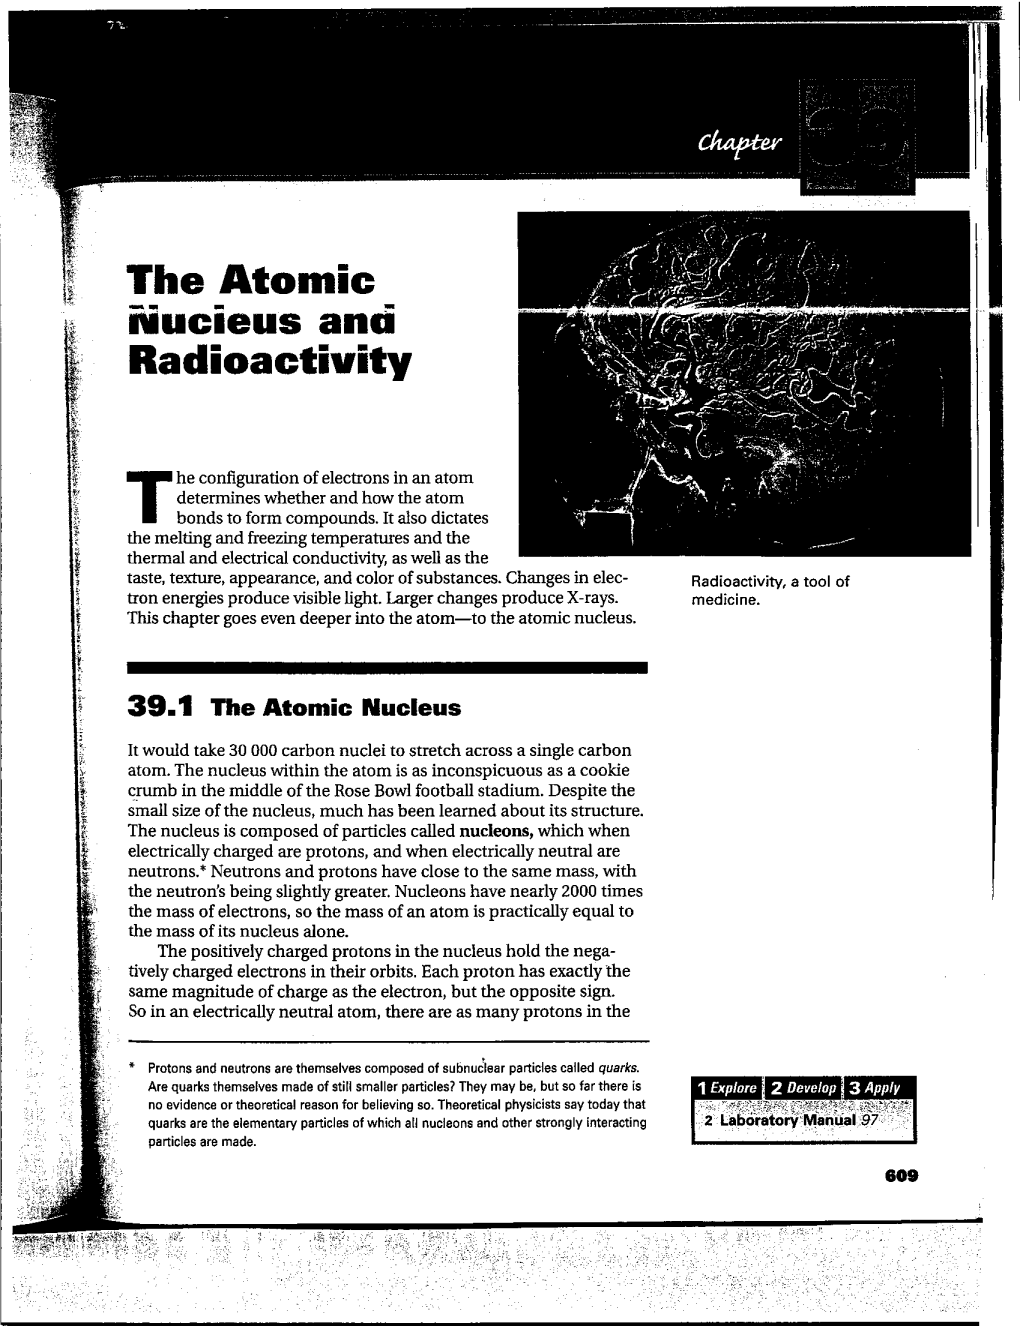 The Atomic Lindens and Radioactivity